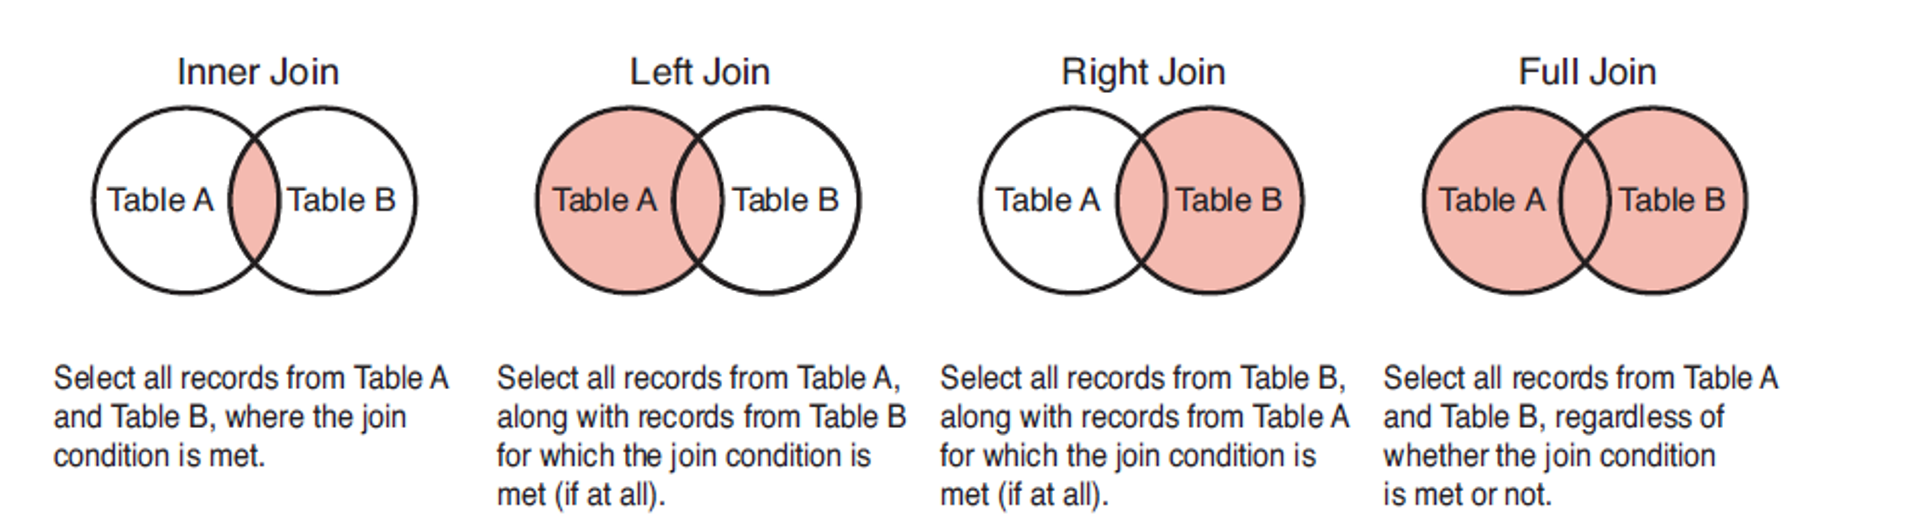 A diagram of different join types